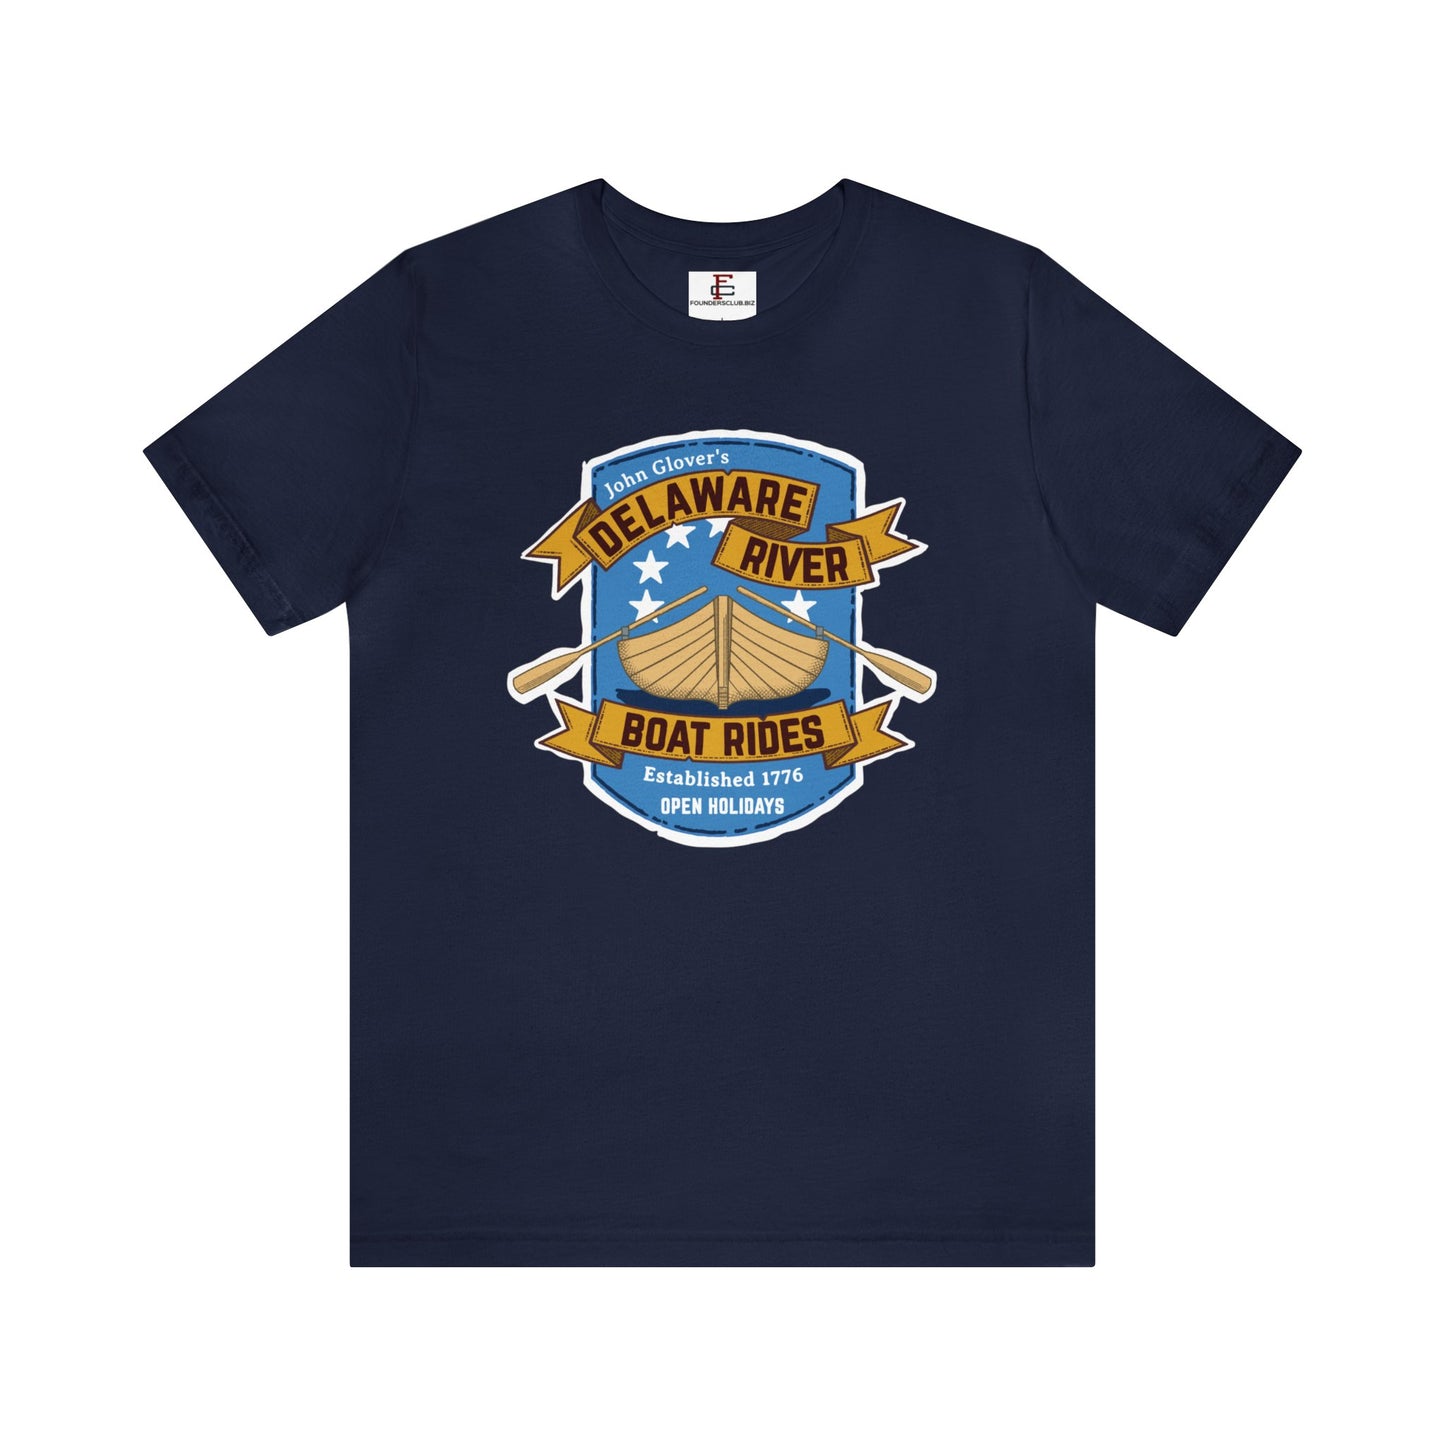 John Glover Delaware River Boat Rides Tee (One Sided)